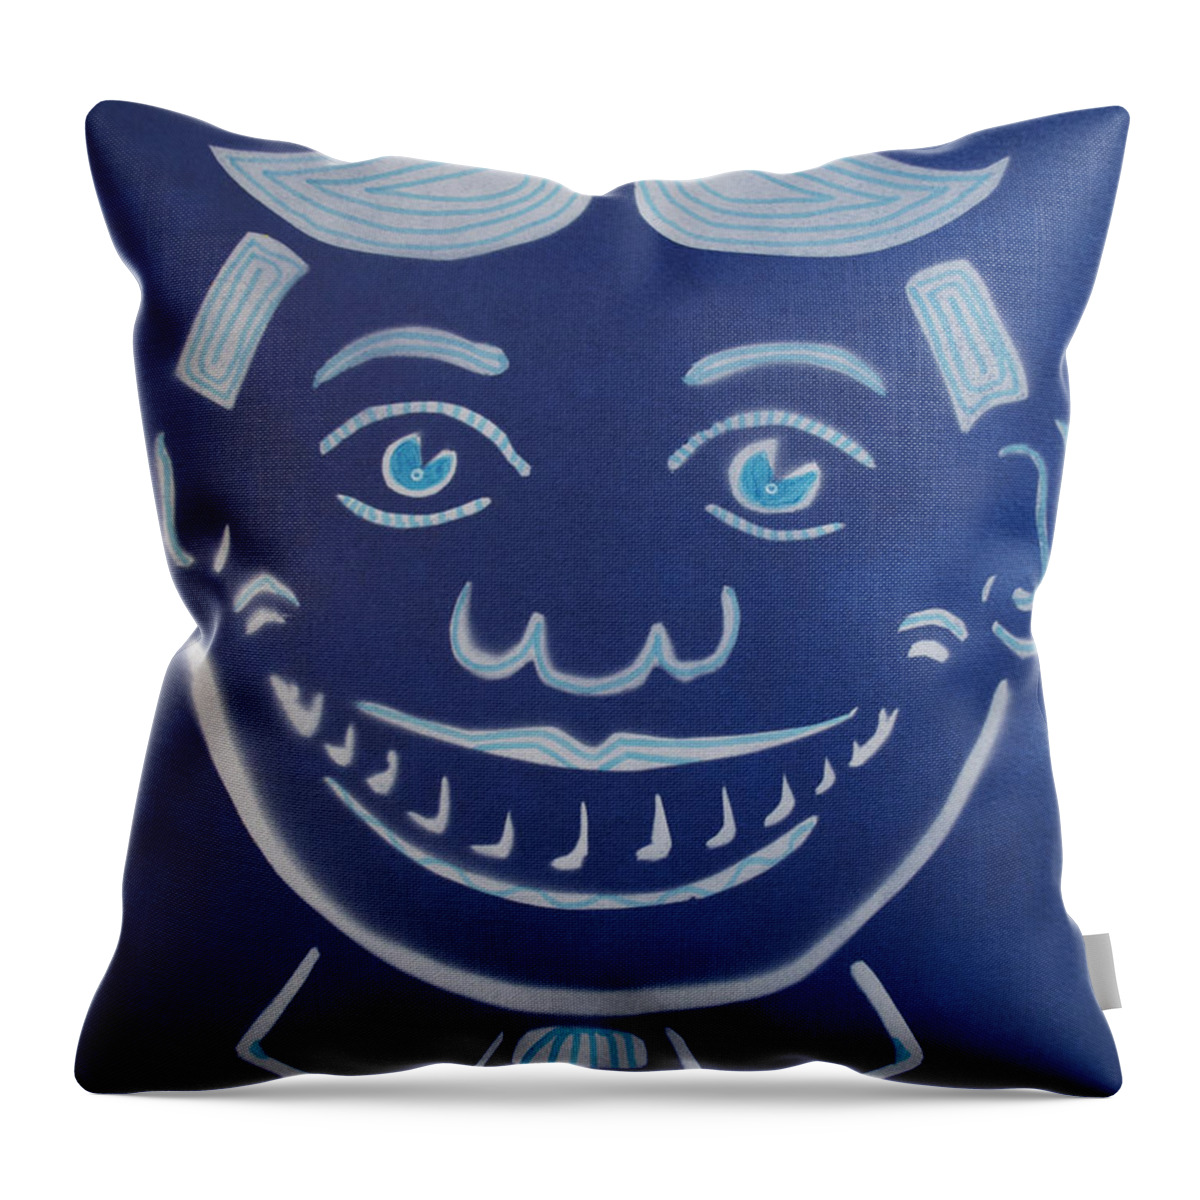 Tillie Of Asbury Park Throw Pillow featuring the painting Blue Dream Tillie by Patricia Arroyo